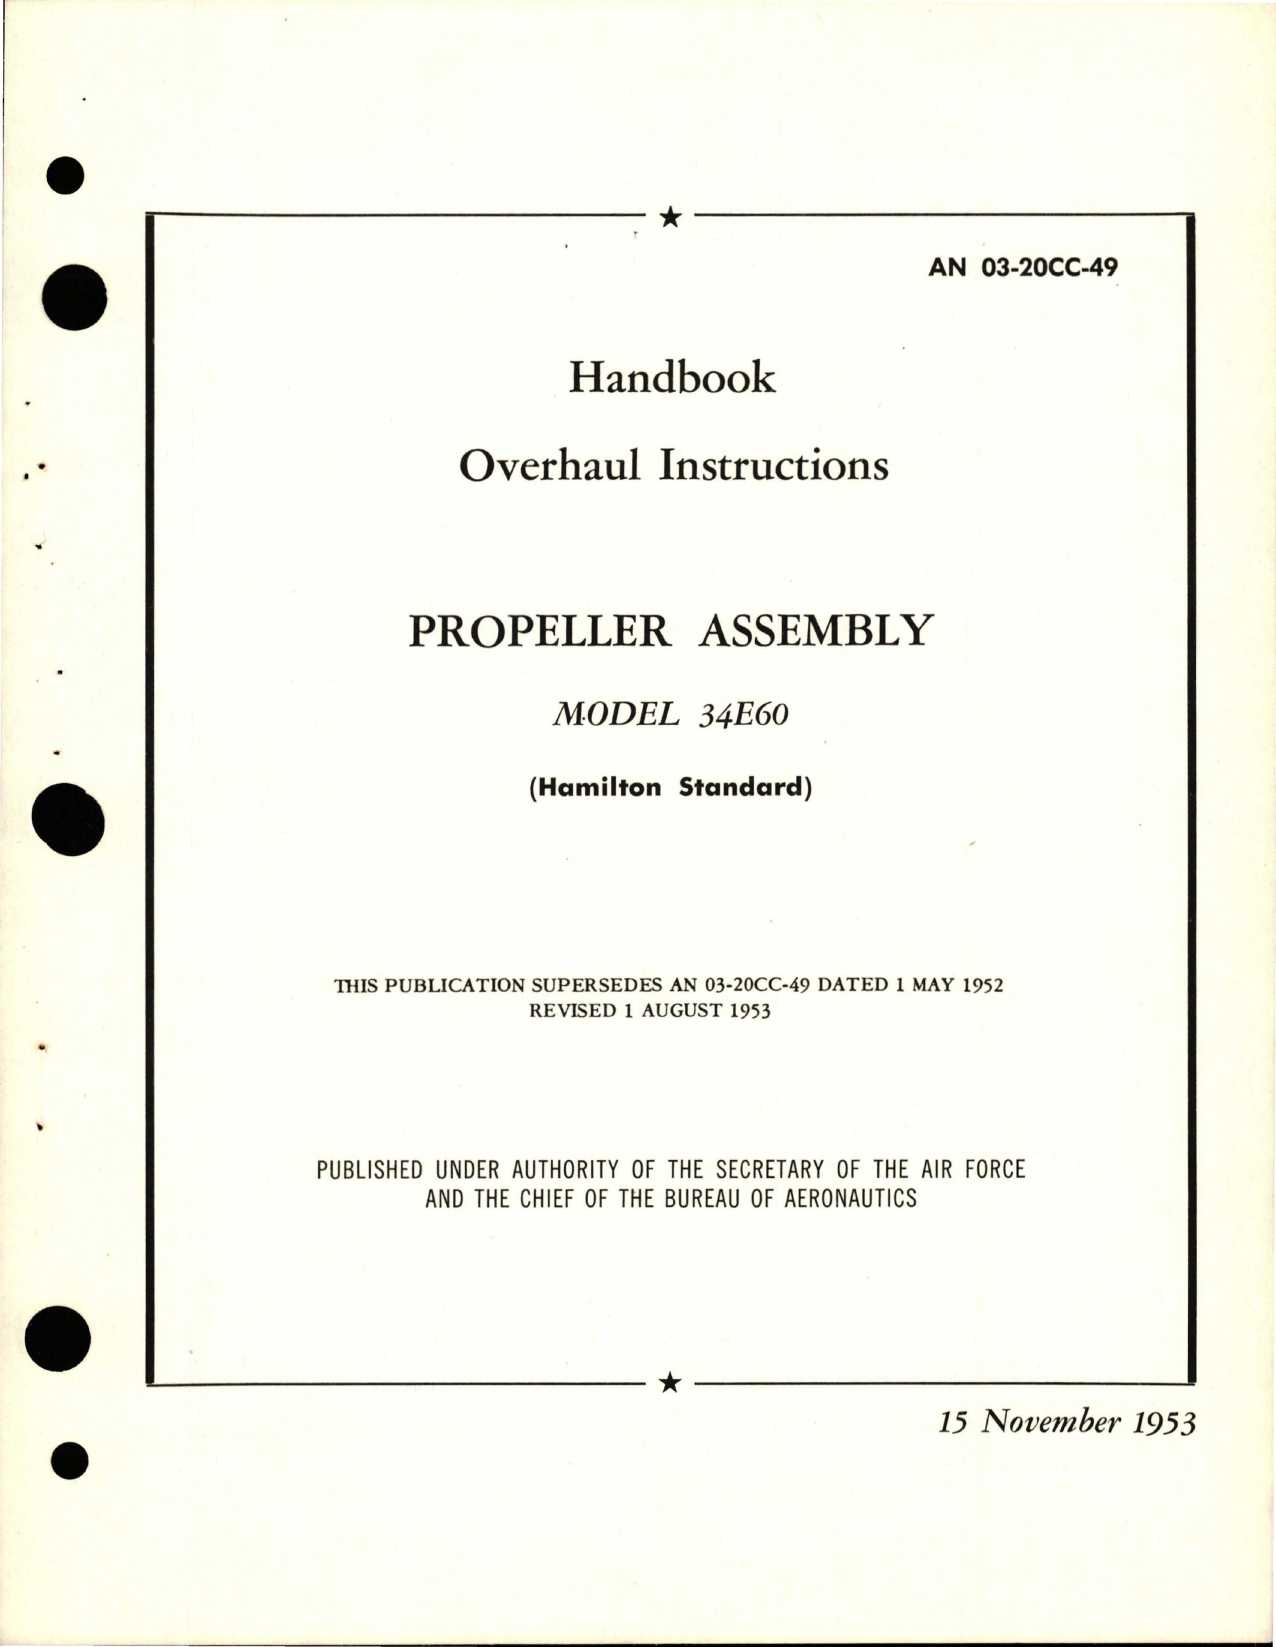 Sample page 1 from AirCorps Library document: Overhaul Instructions for Propeller Assembly - Model 34E60